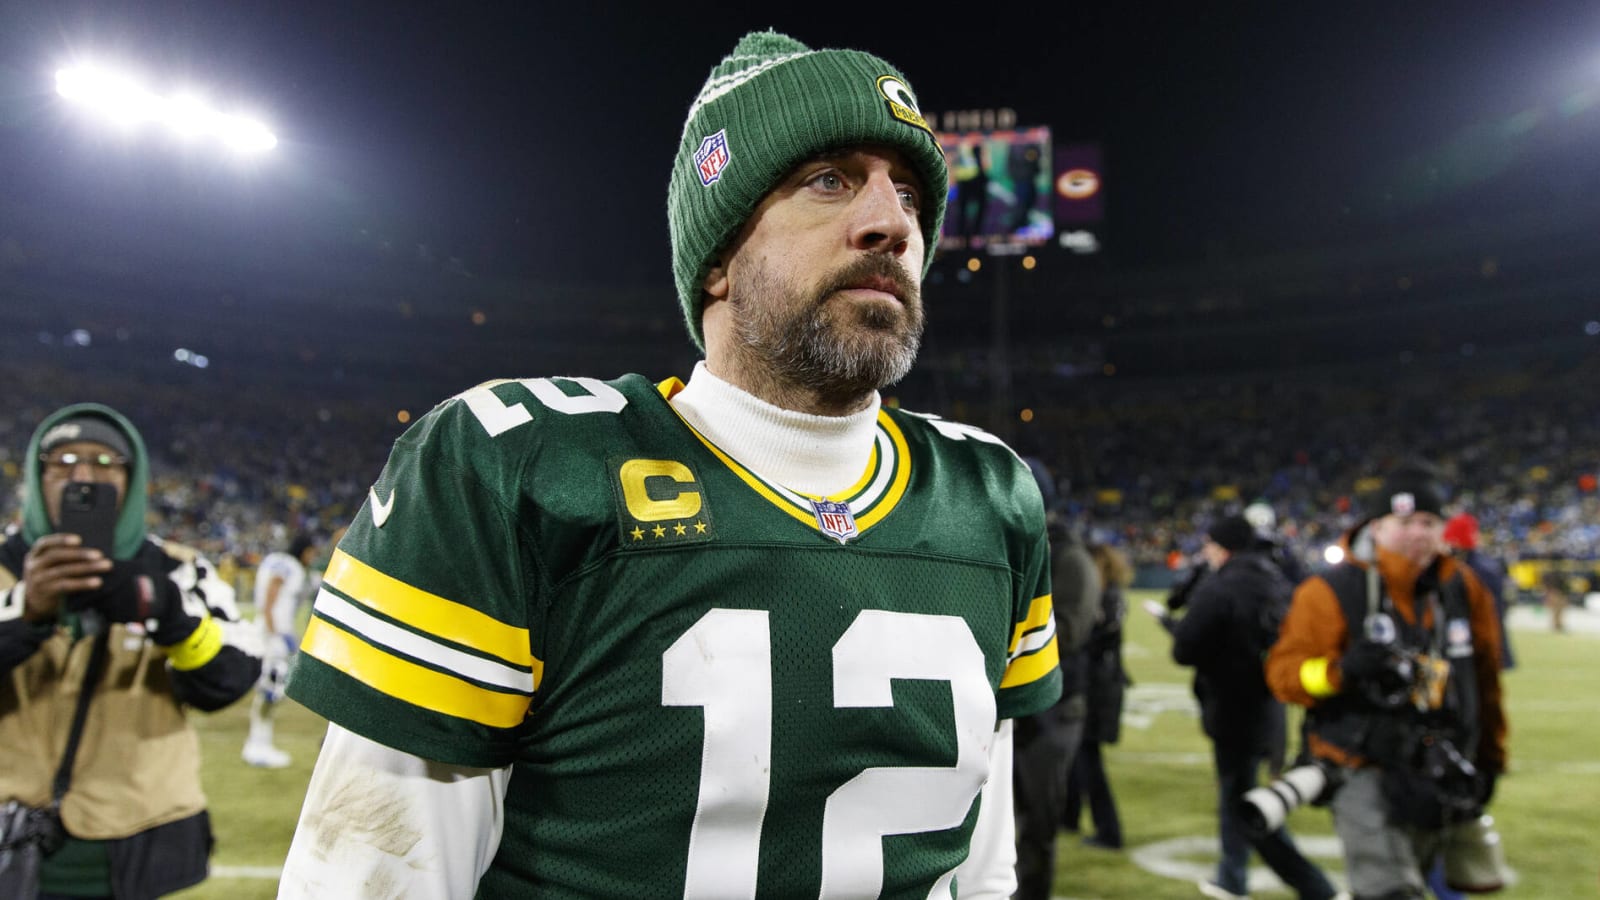 EPSN analyst rips into Packers QB Aaron Rodgers